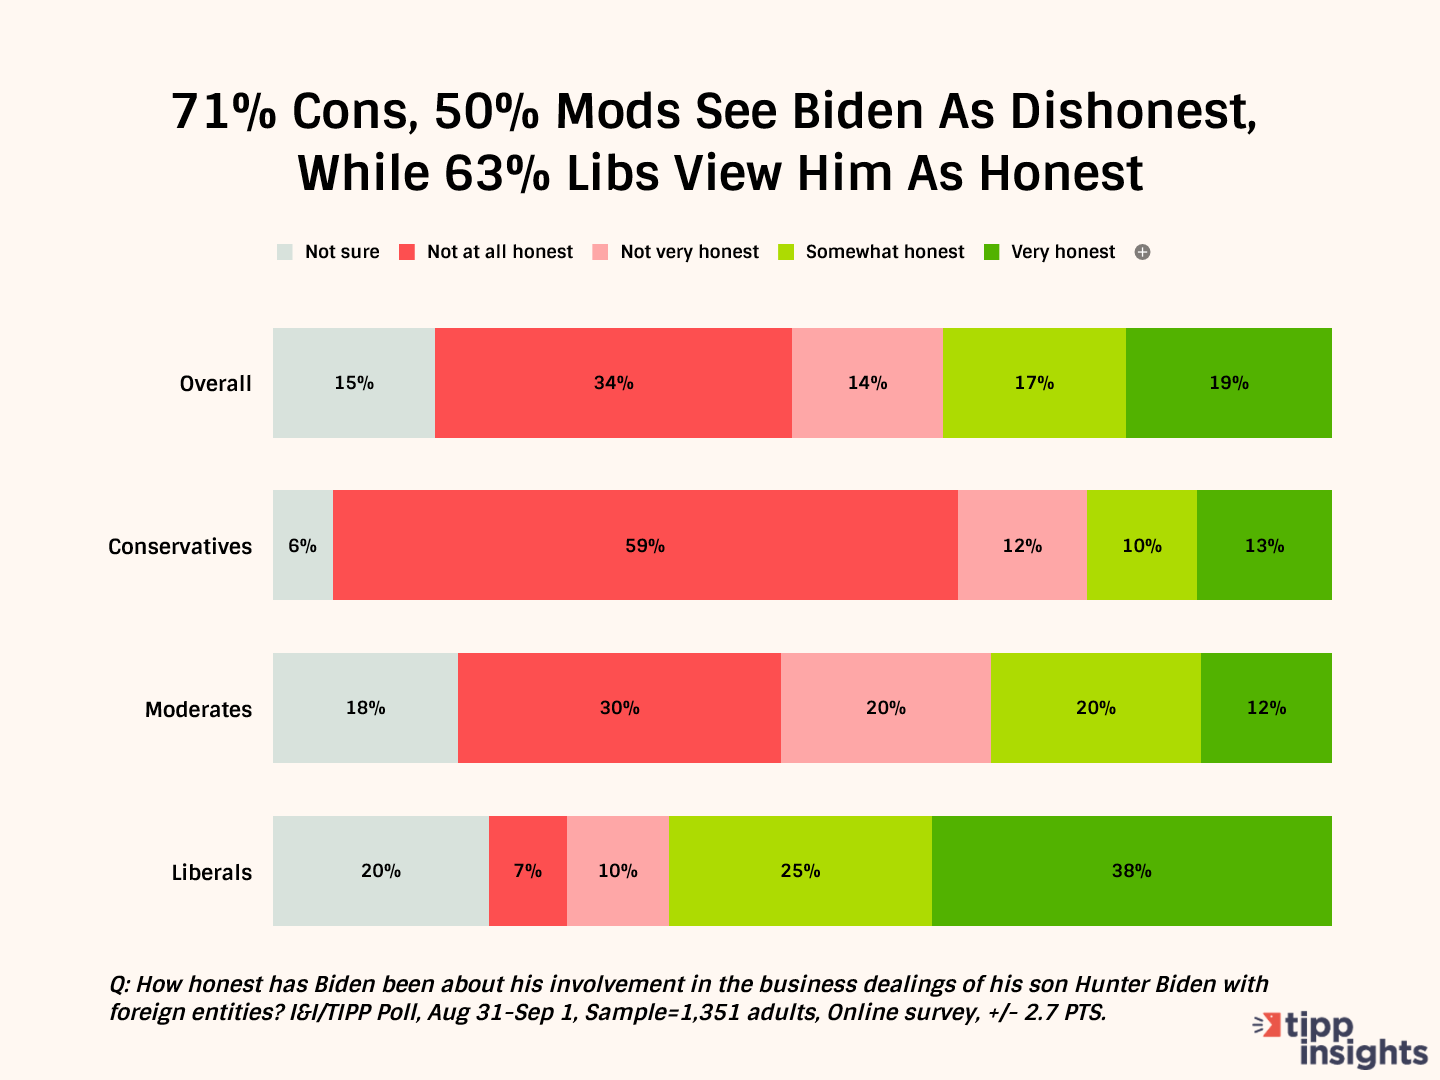 As Impeachment Inquiry Looms, Half Say Biden's Been Dishonest About Business Deals: I&I/TIPP Poll